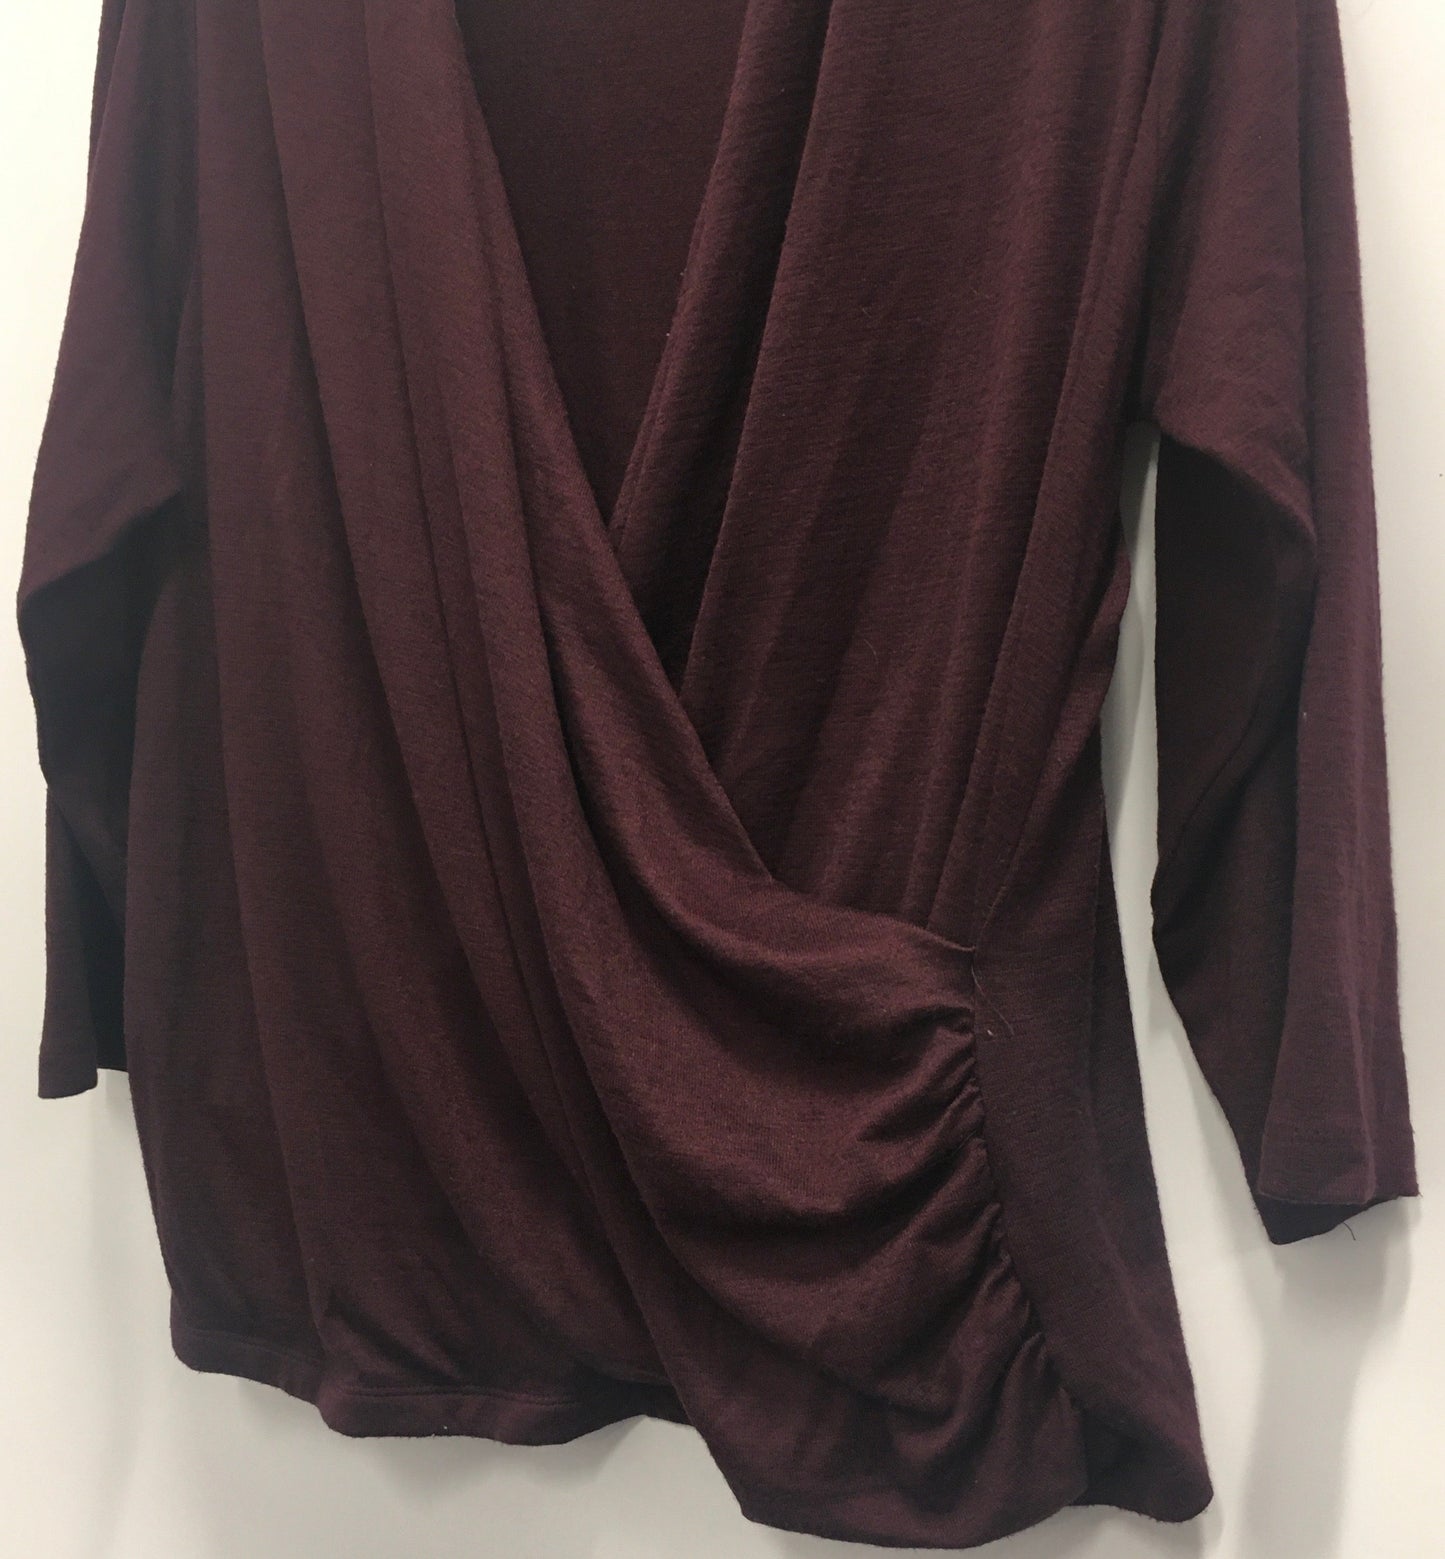 Top Long Sleeve By 41 Hawthorn  Size: 2x